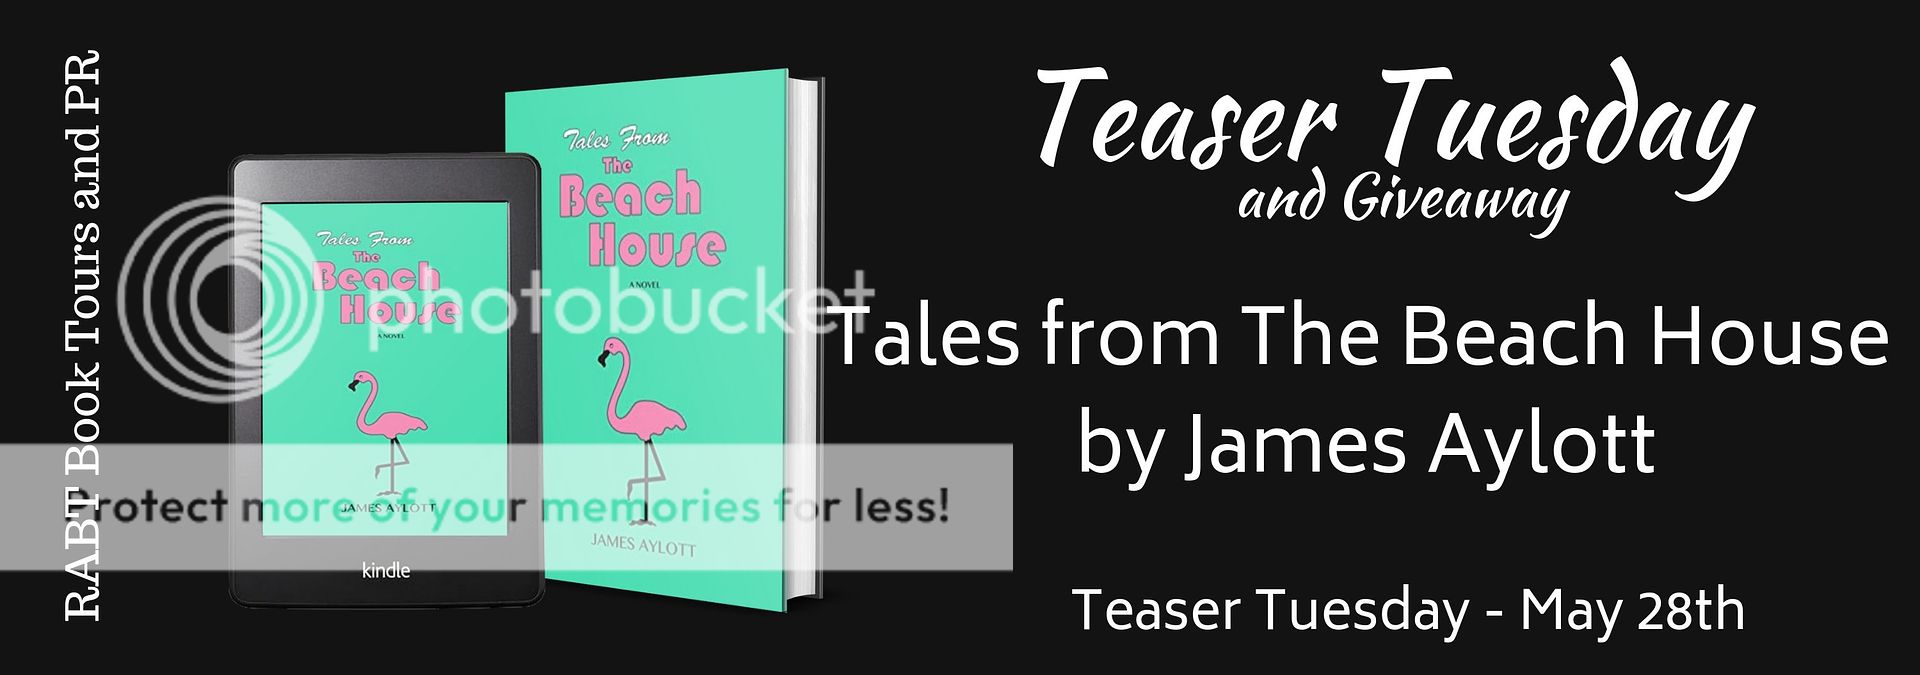 #TeaserTuesday and #Giveaway Tales From The Beach House by James Aylott @BeachHouseNovel #excerpt #fiction #giveaway @RABTBookTours